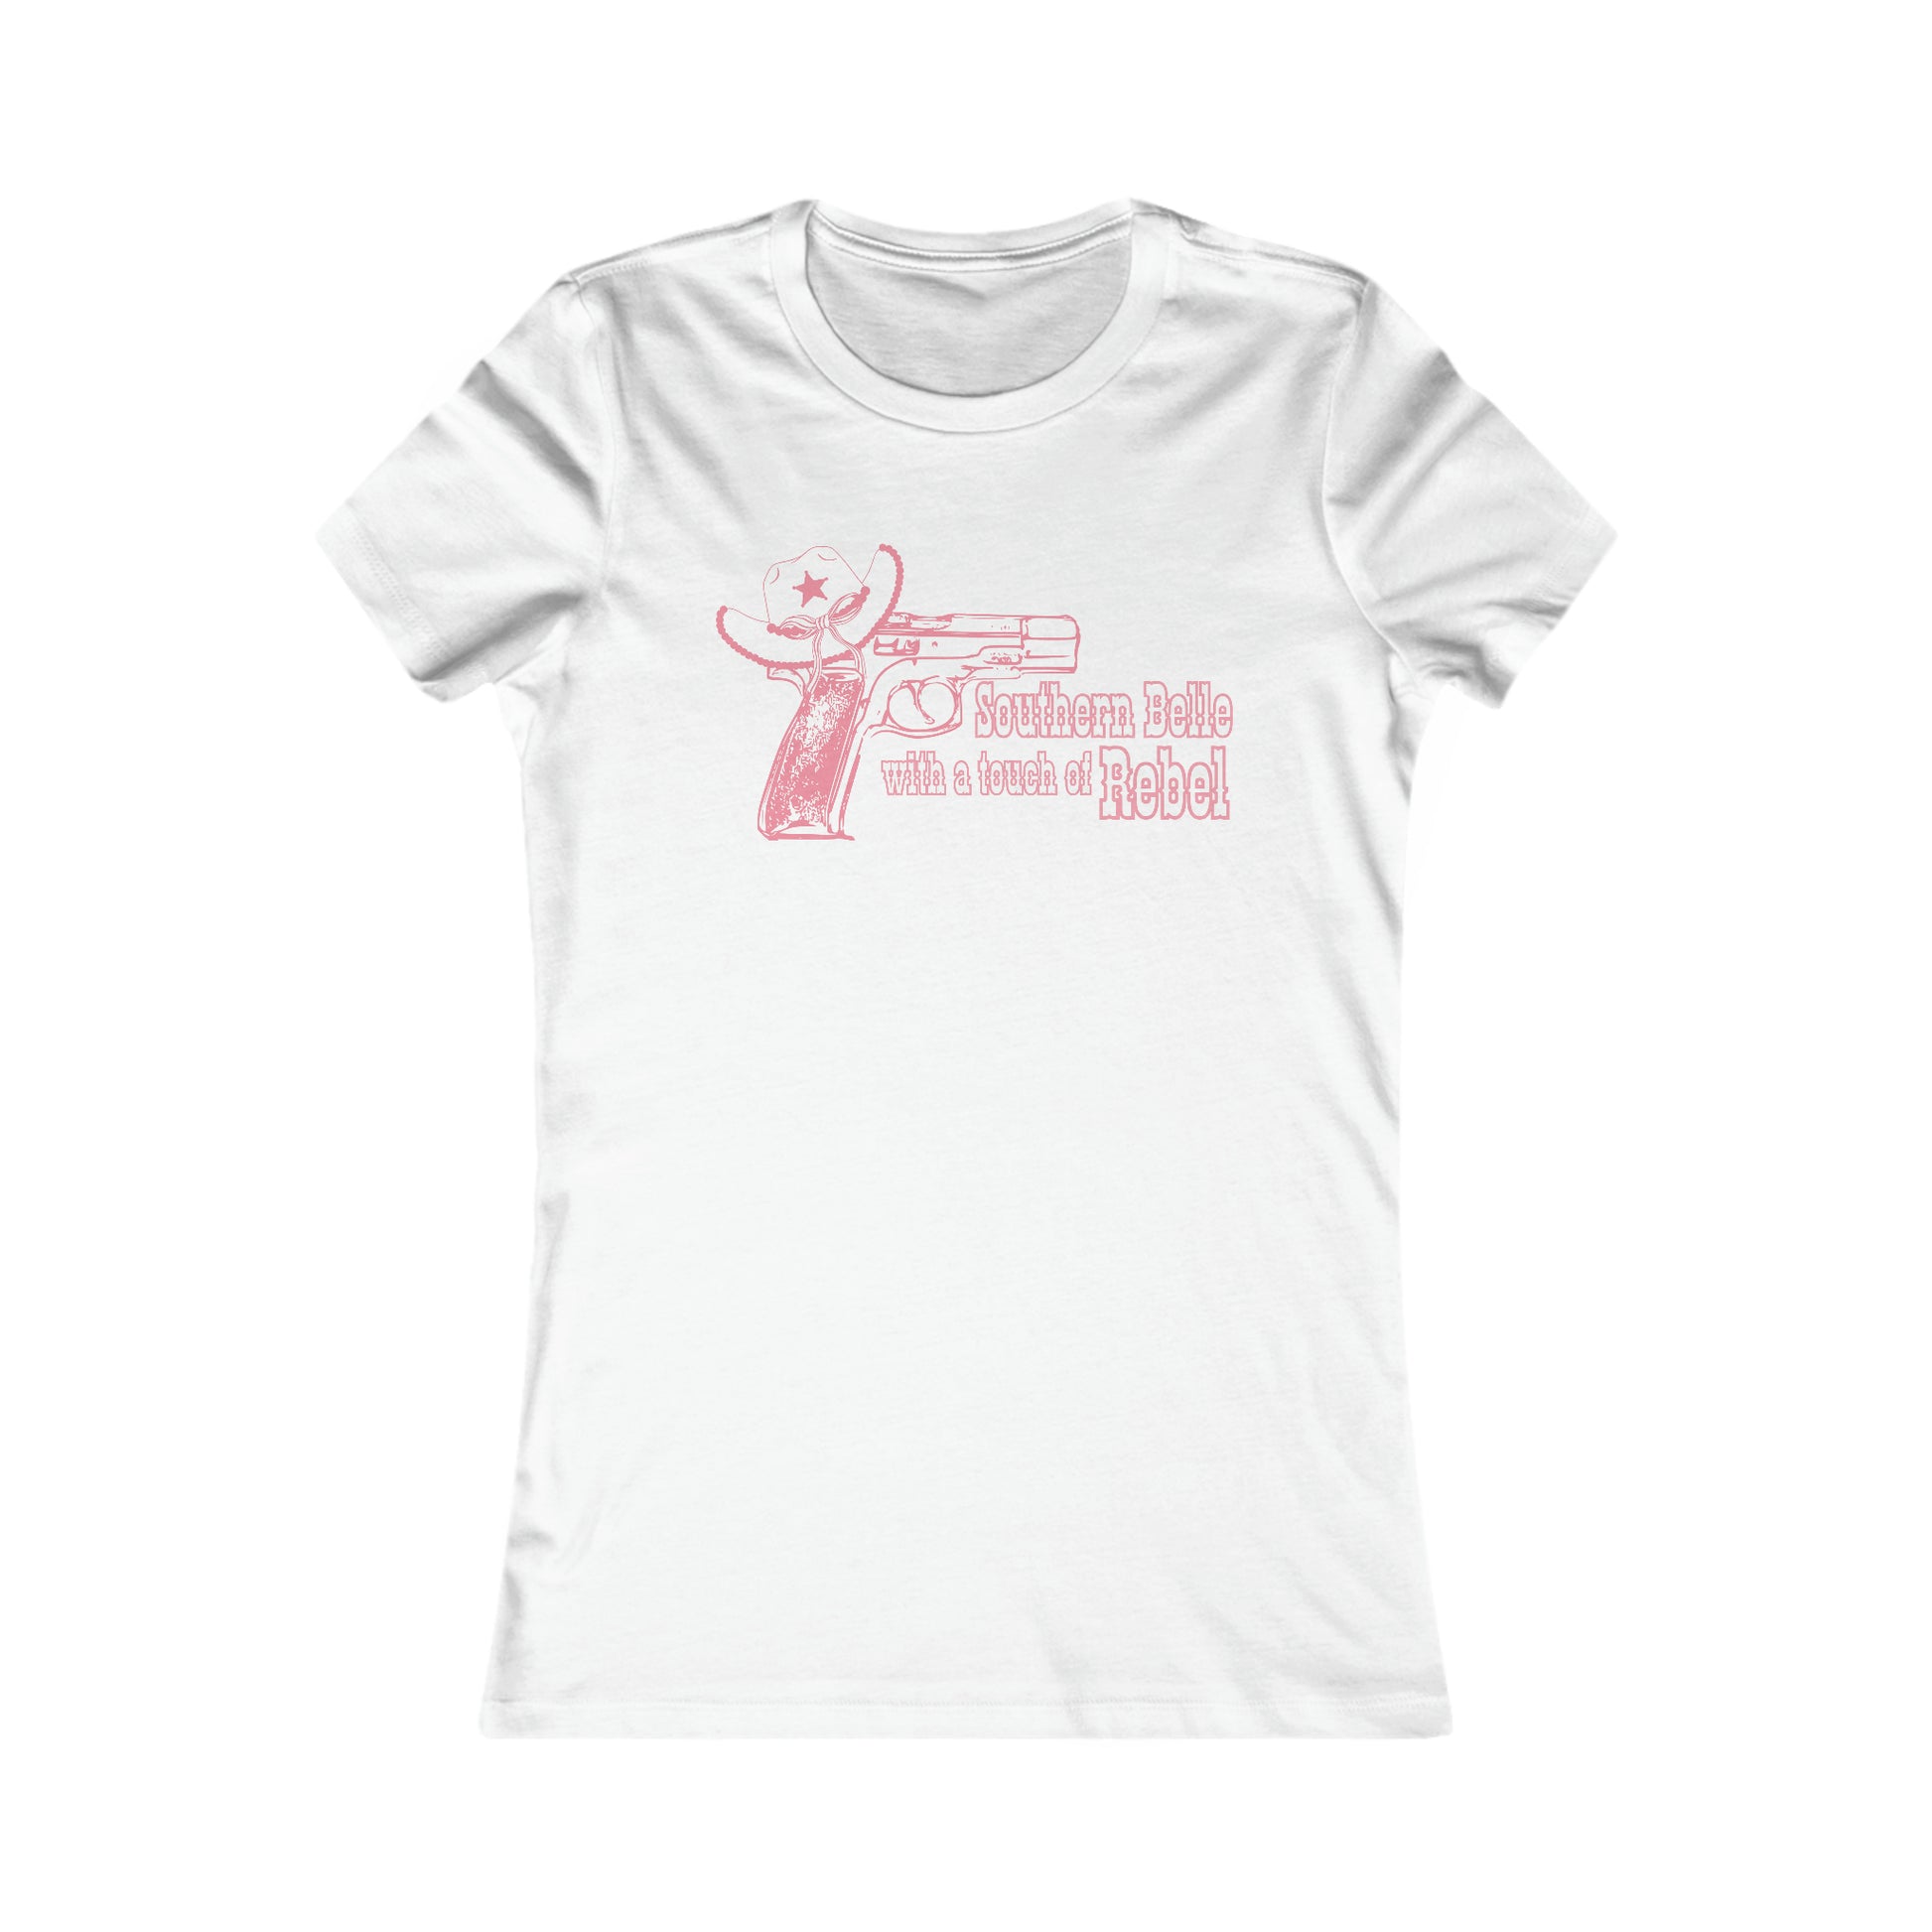 Southern Belle With A Touch Of Rebel Ladies Tee White